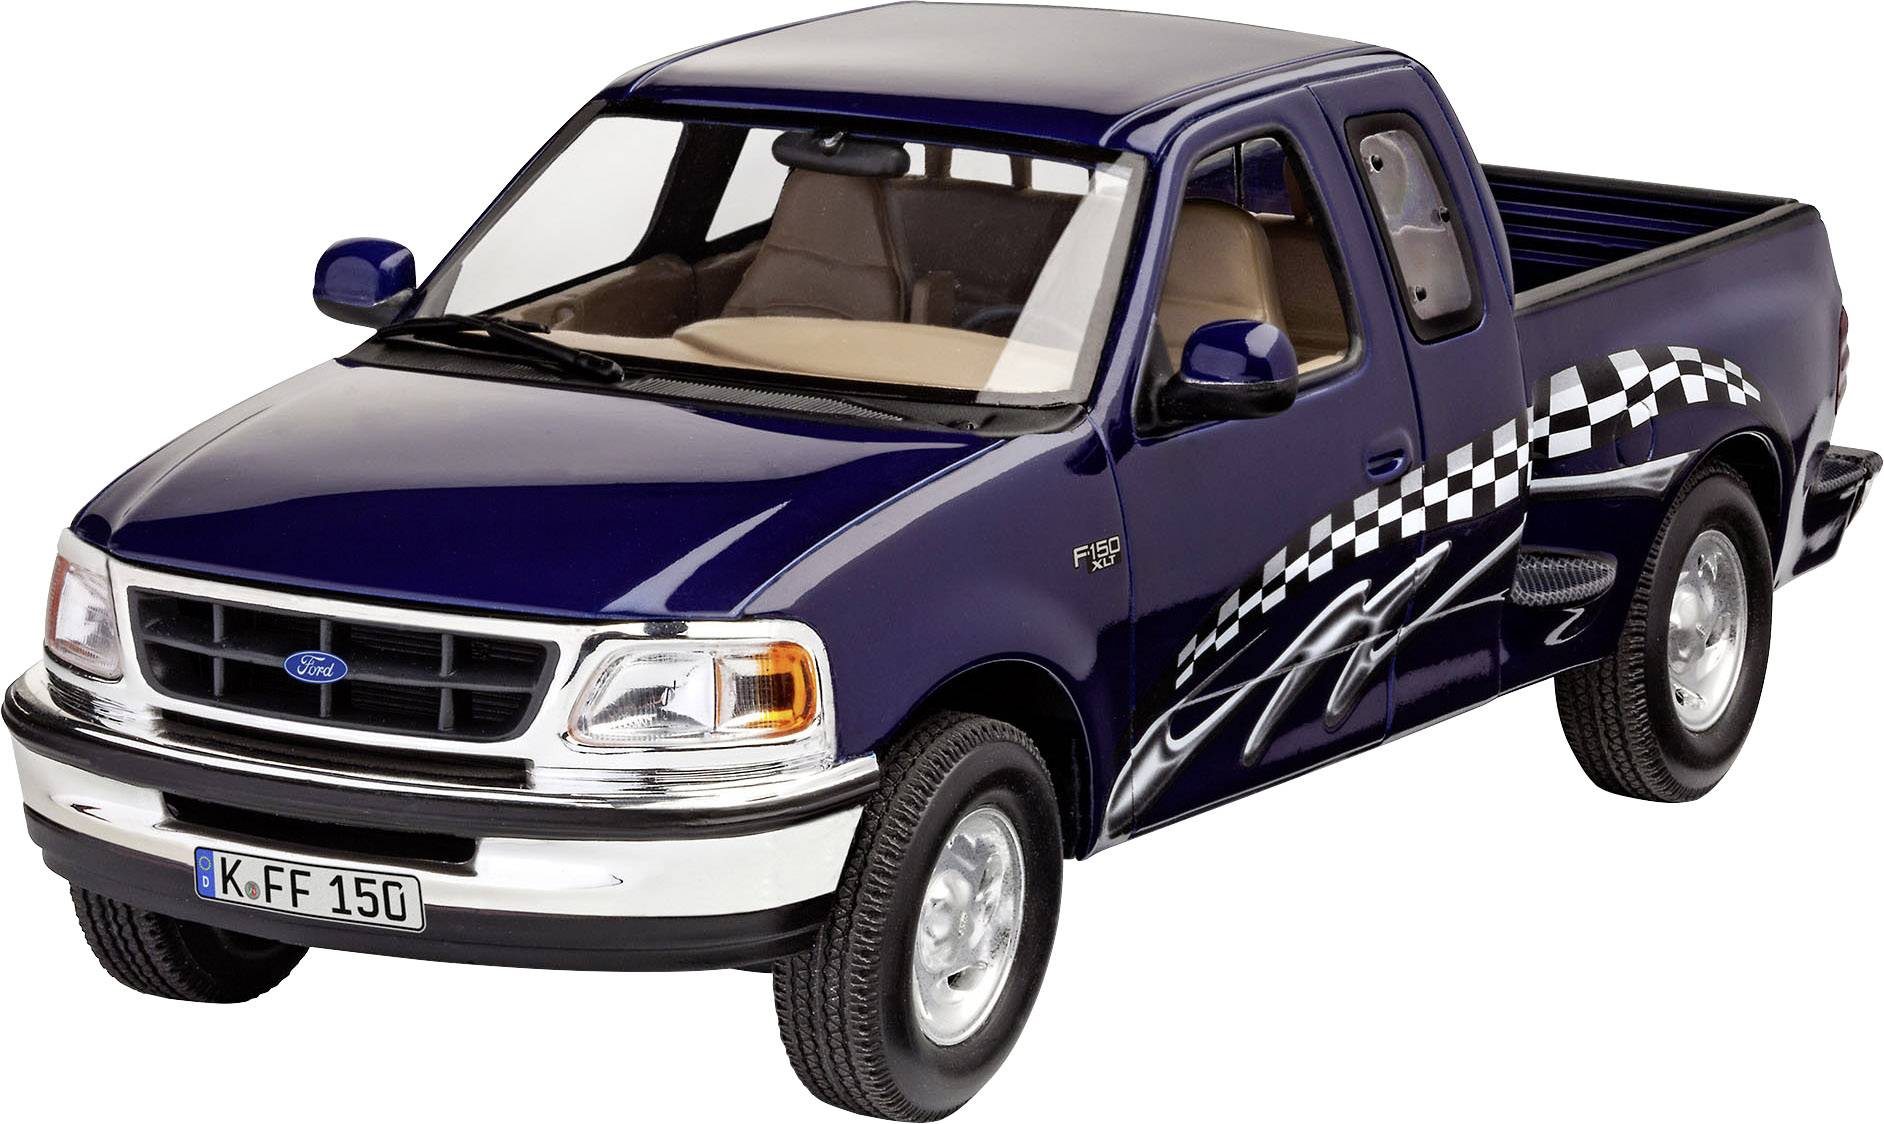 Ford F-150 XLT 1997 1:25 Scale Kit